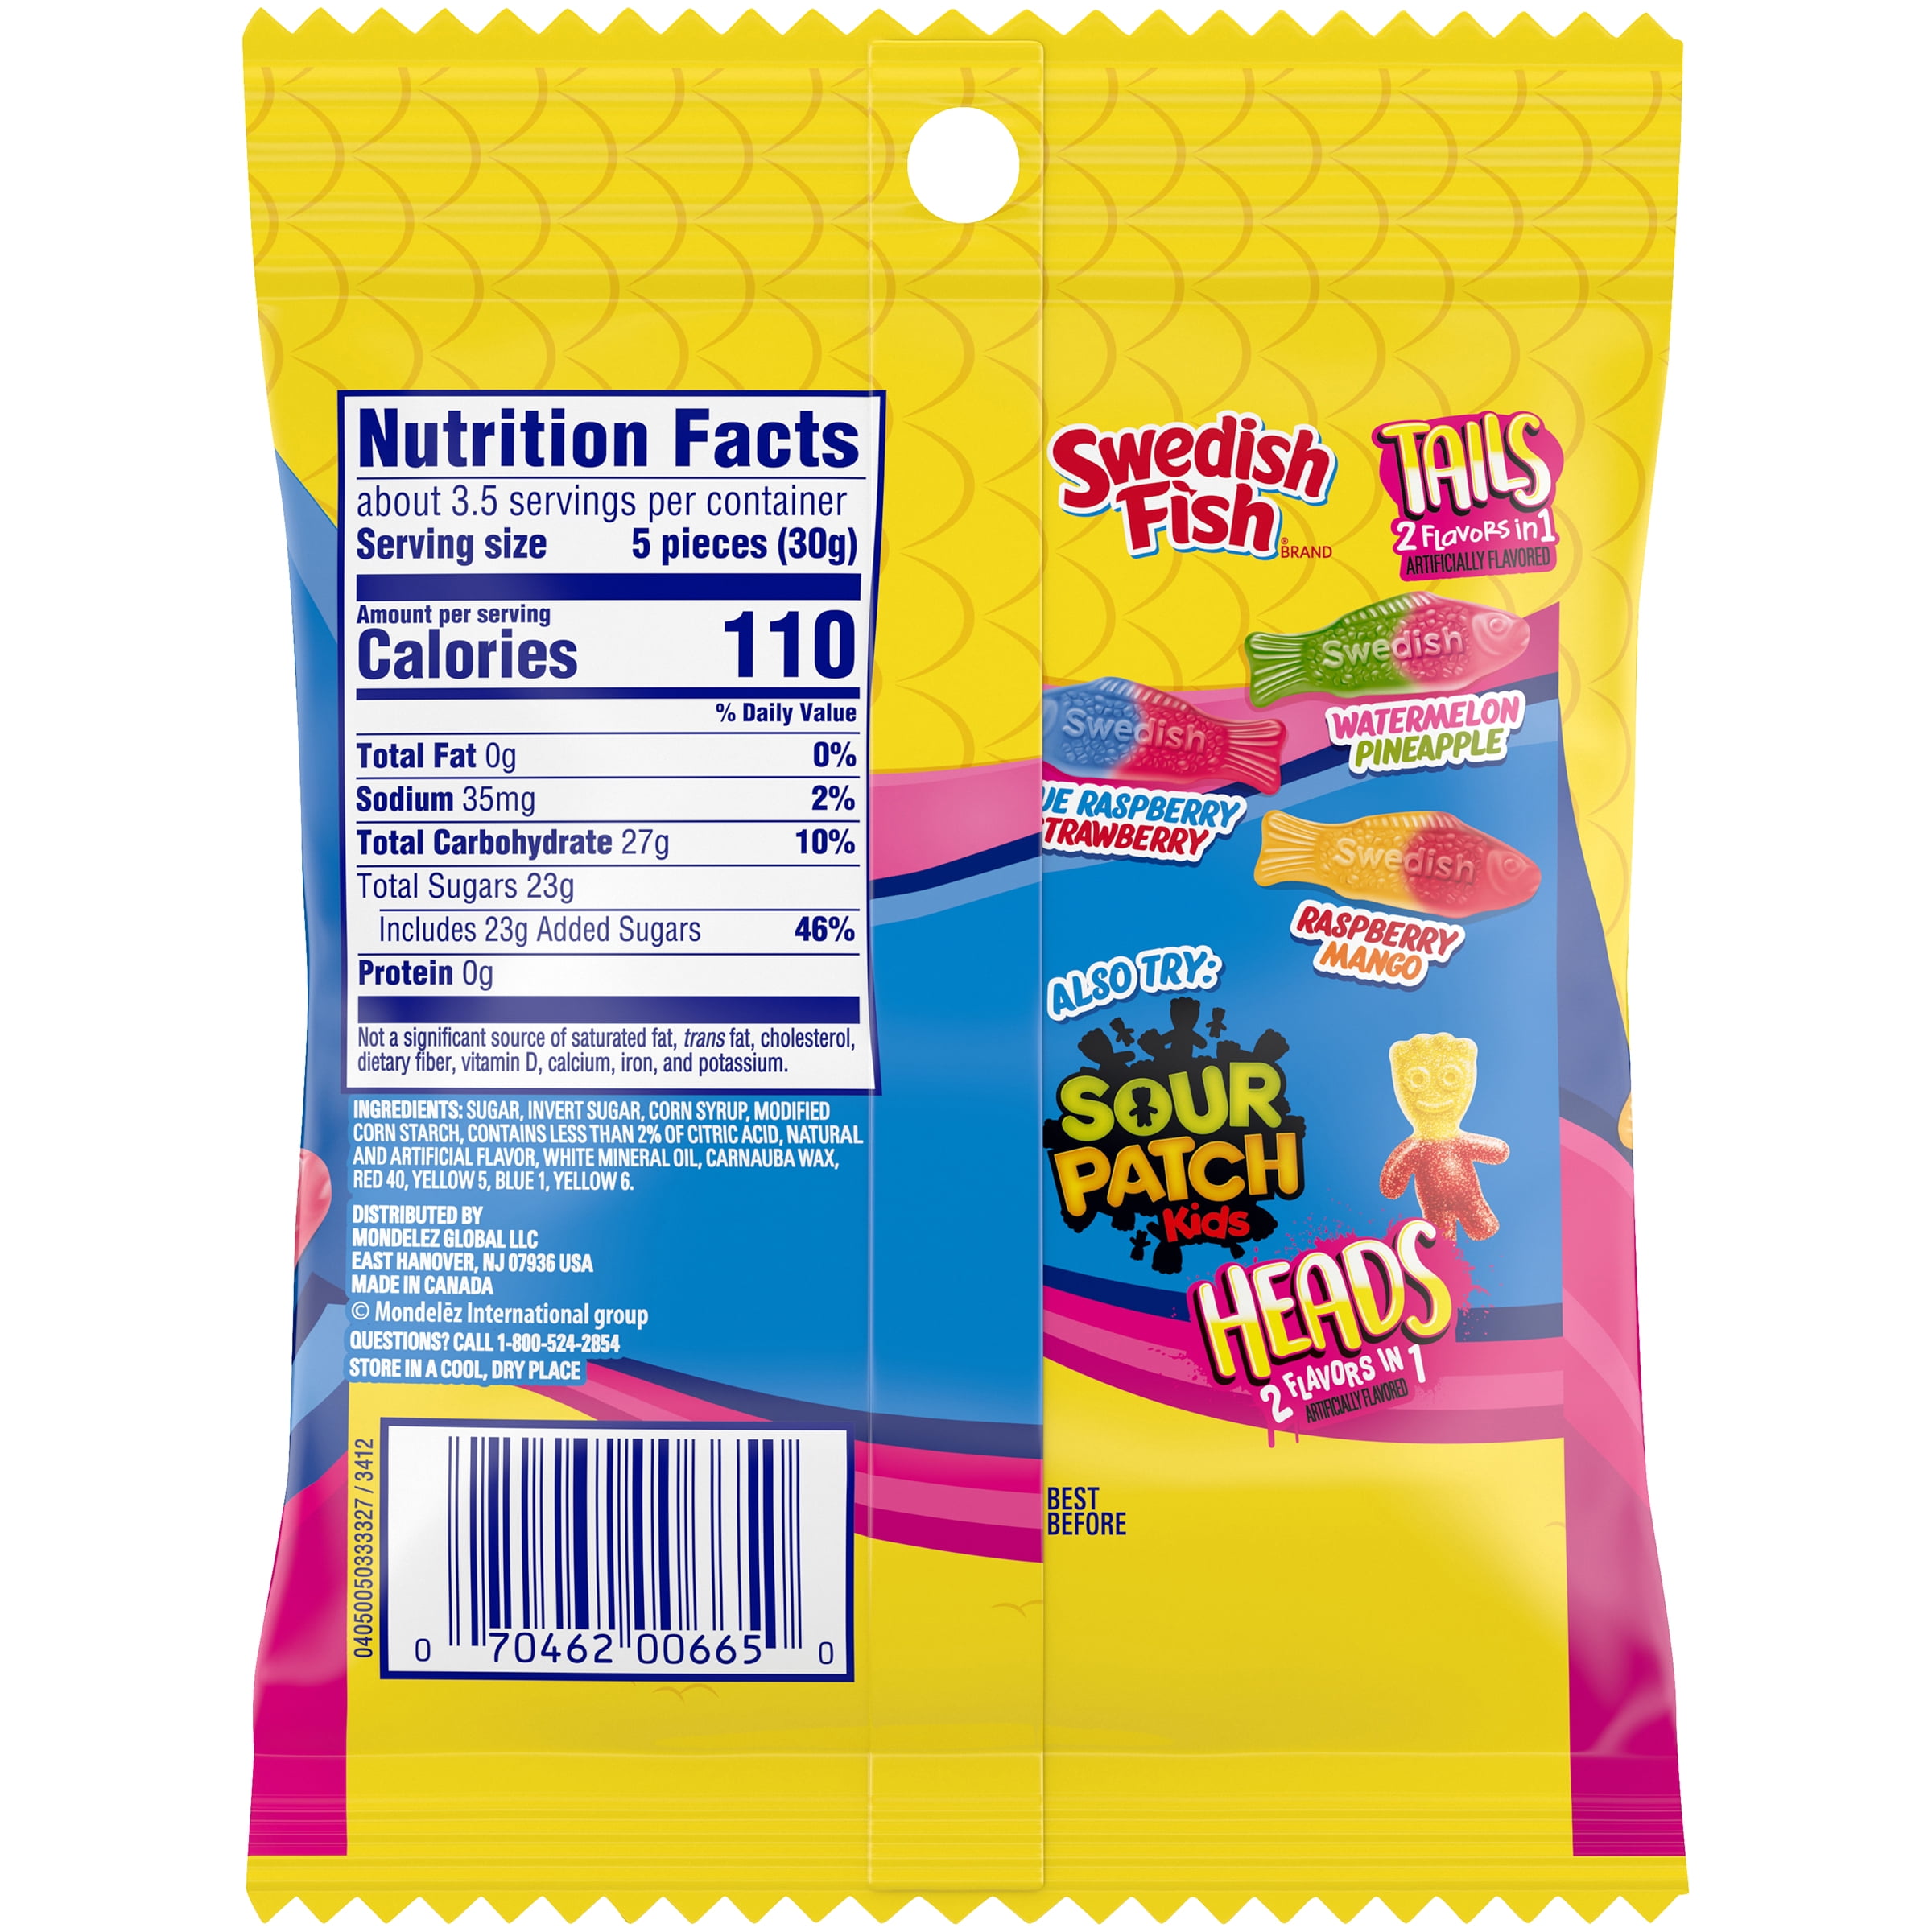 Swedish Fish Candy, Soft & Chewy, Tails, 2 Flavors in 1 - 8 oz